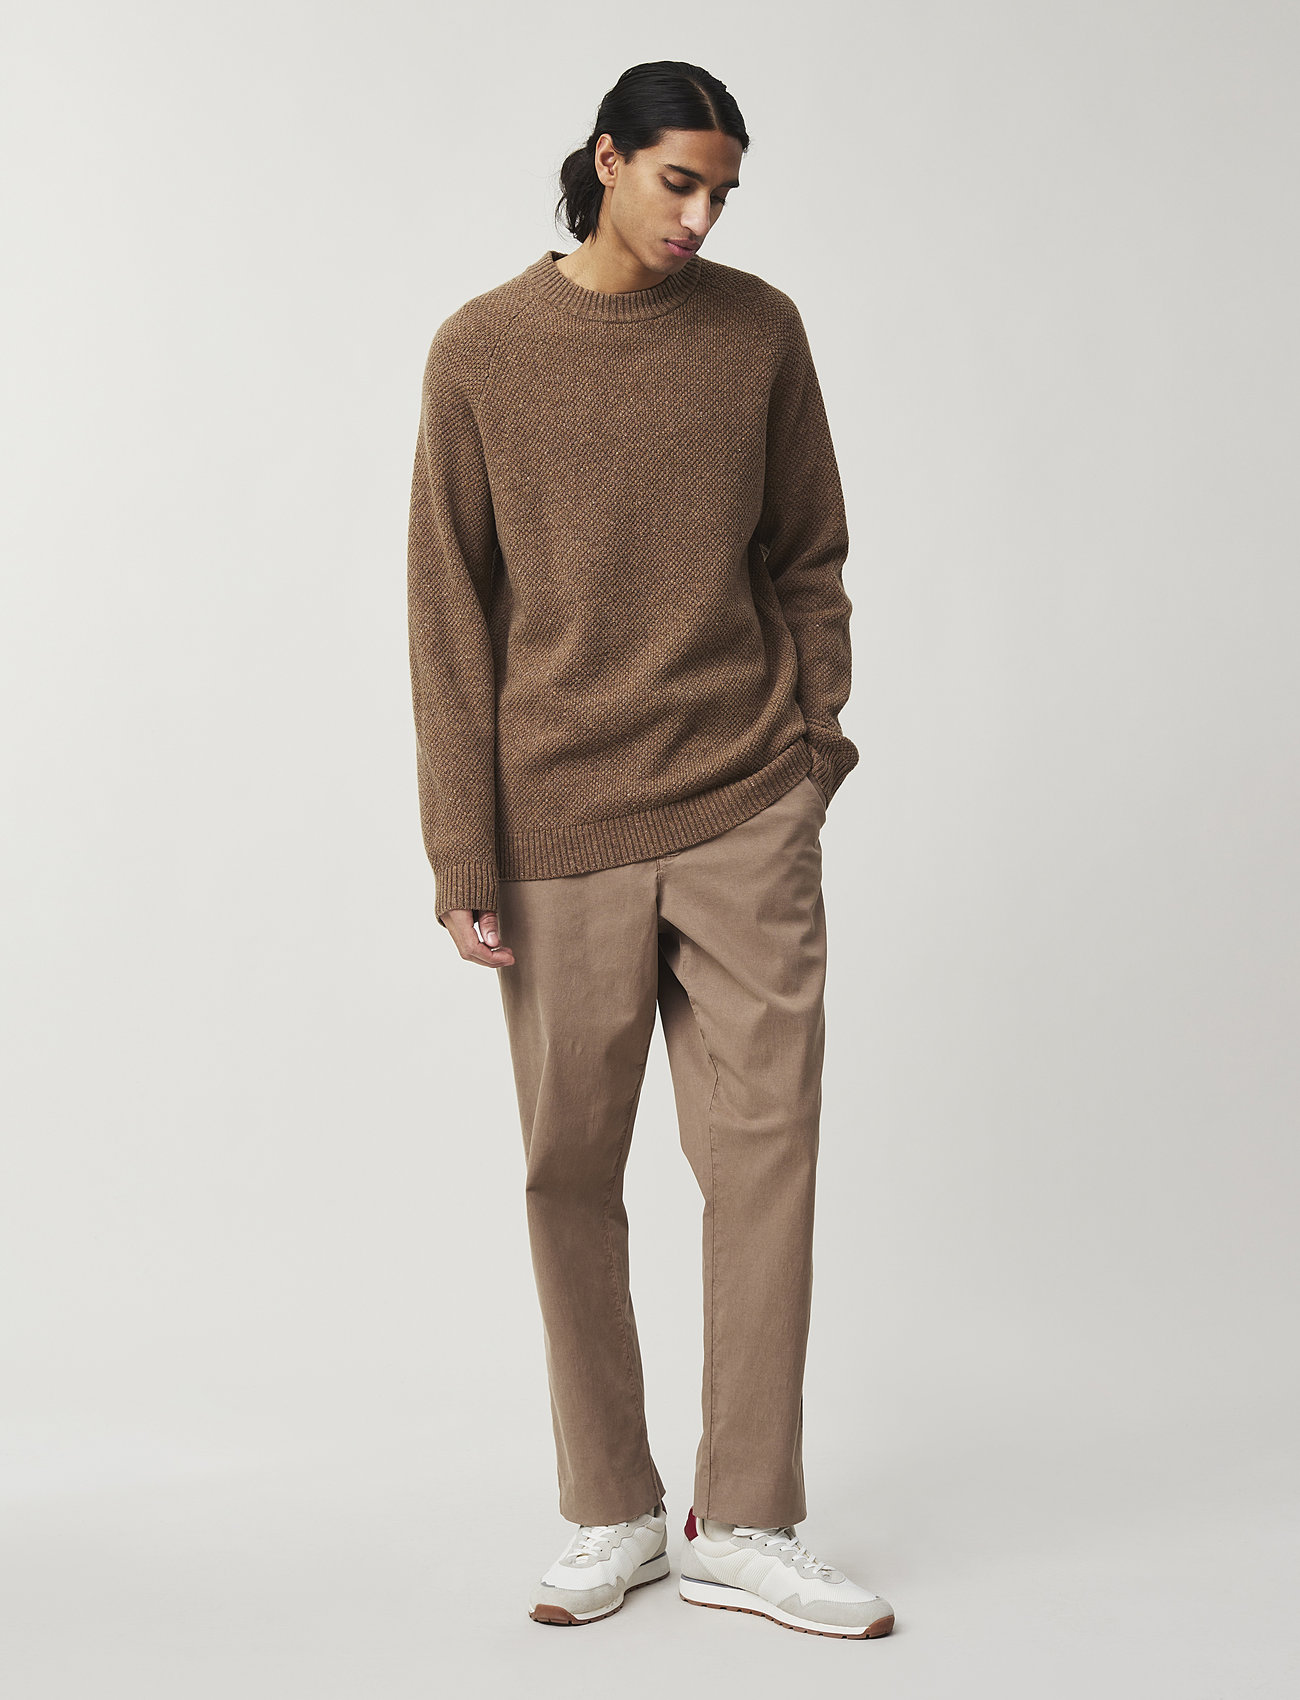 Lexington Clothing - Felix Donegal Sweater - rundhals - brown - 1